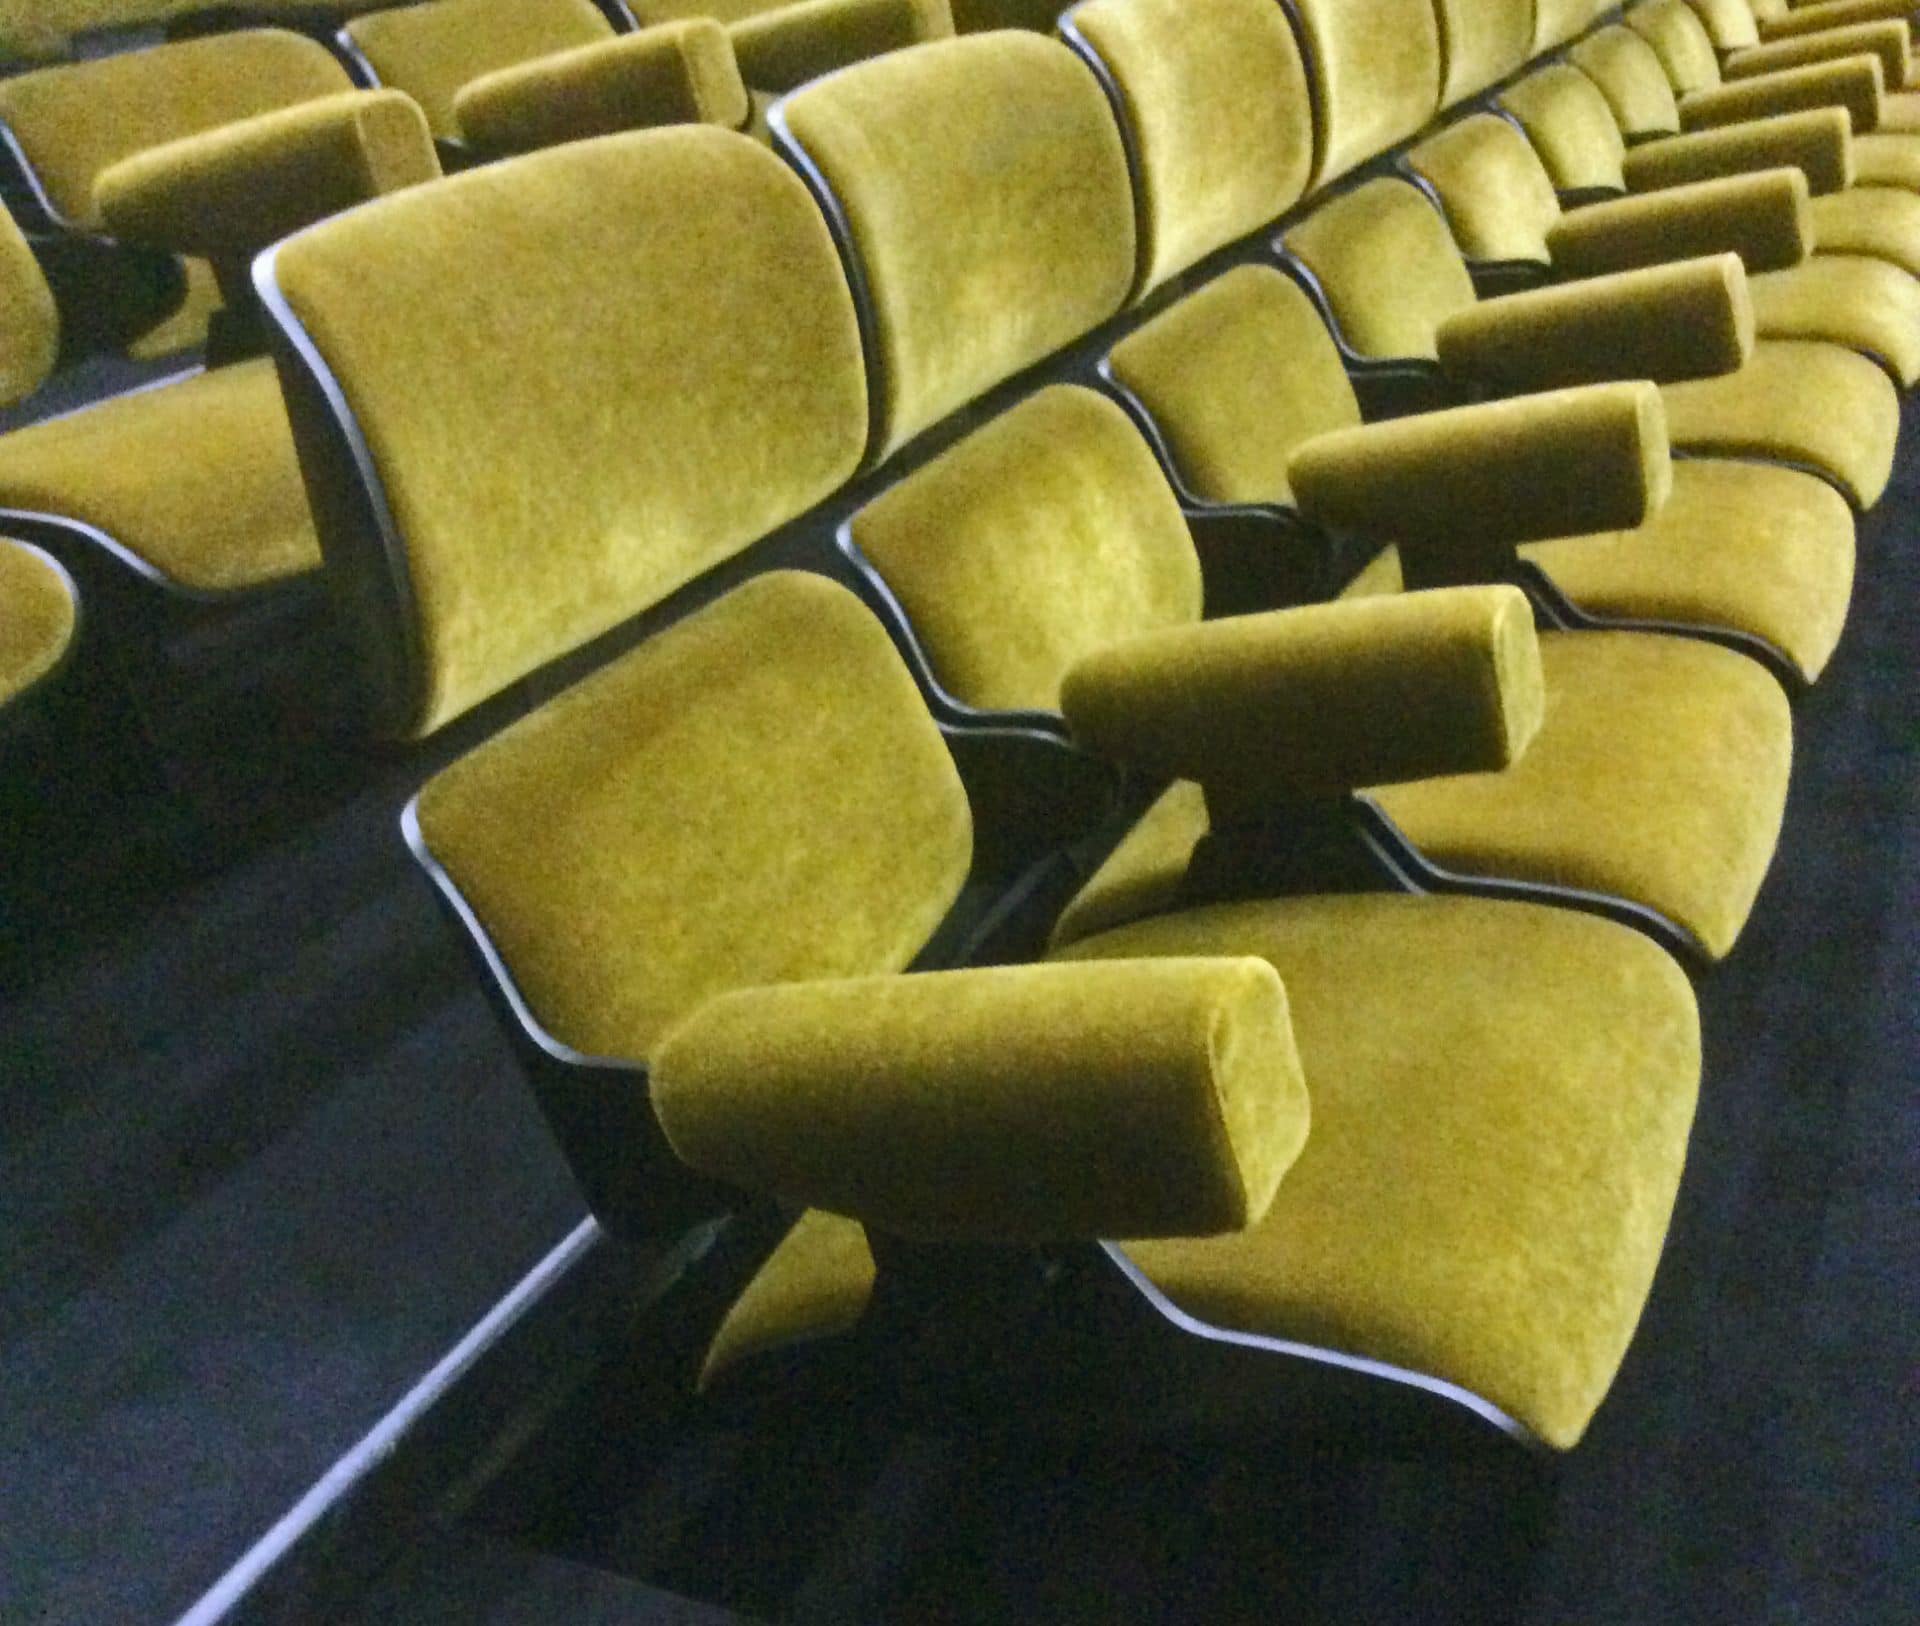 Armchairs Eliseo for the new Prada Foundation headquarters